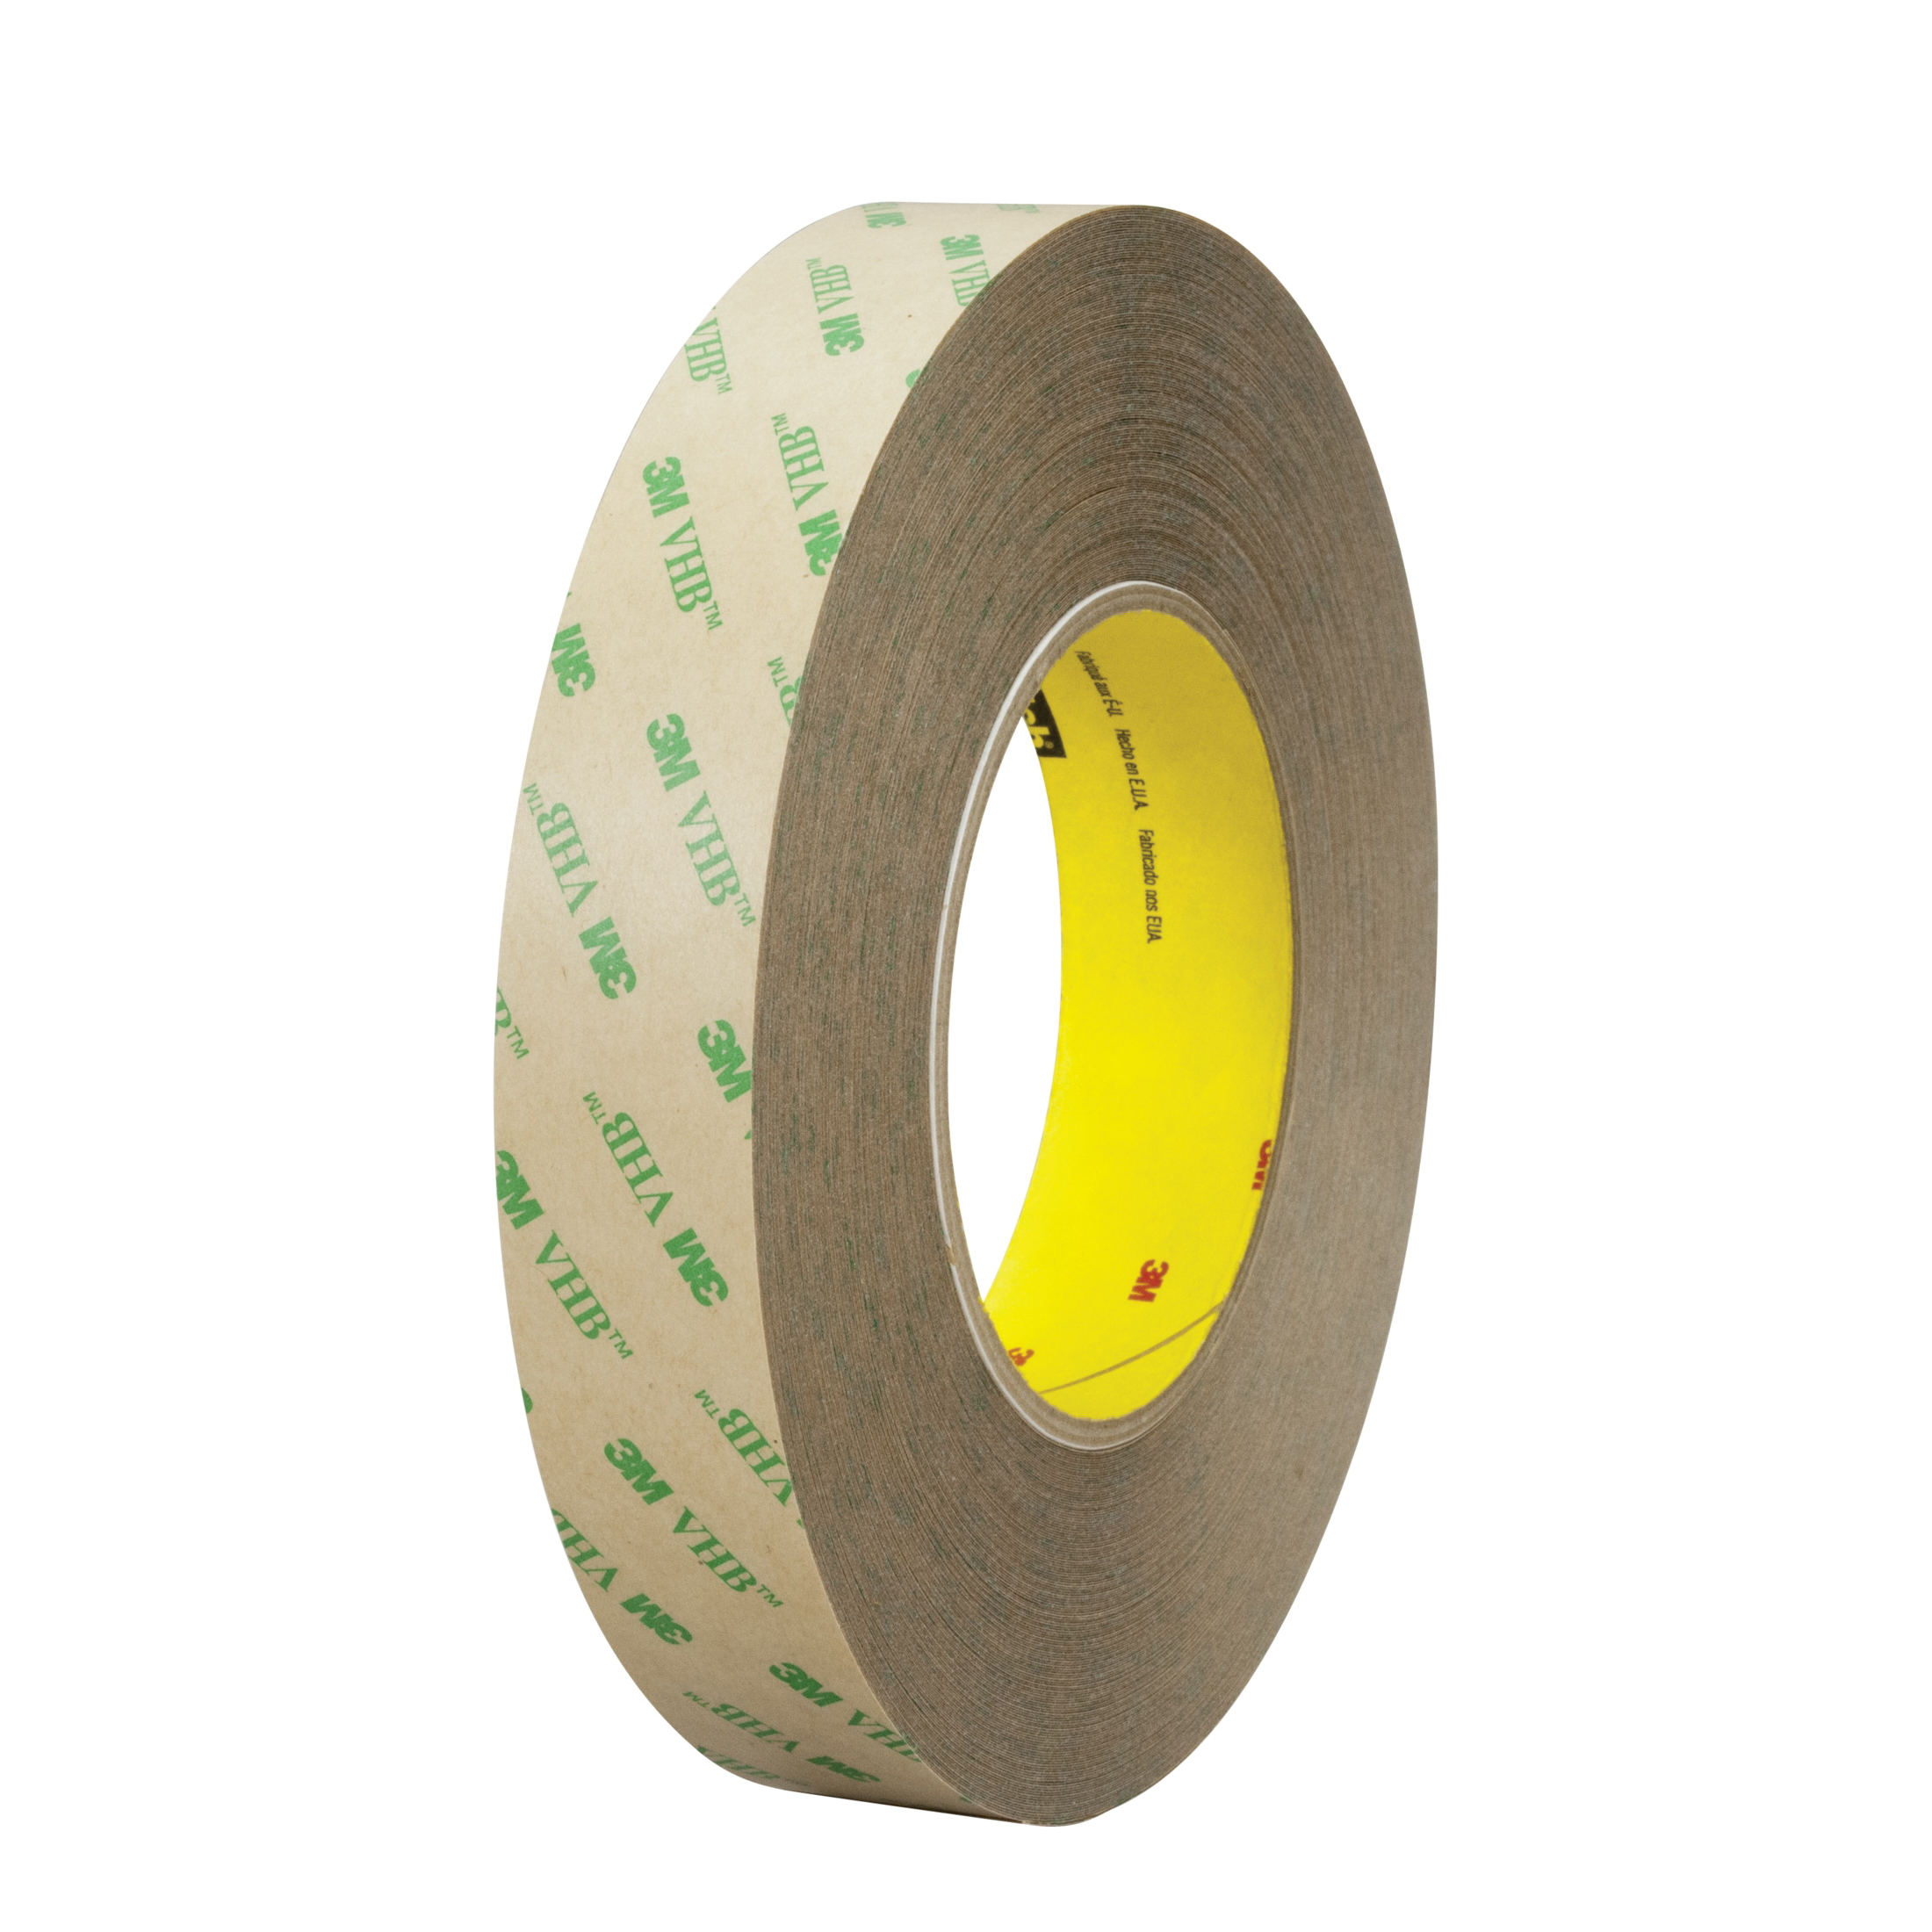 3M™ VHB™ 021200-15801 High Performance Low Tack Adhesive Transfer Tape, 60 yd L x 2 in W, 9.2 mil THK, 5 mil 100MP Acrylic Adhesive, Clear